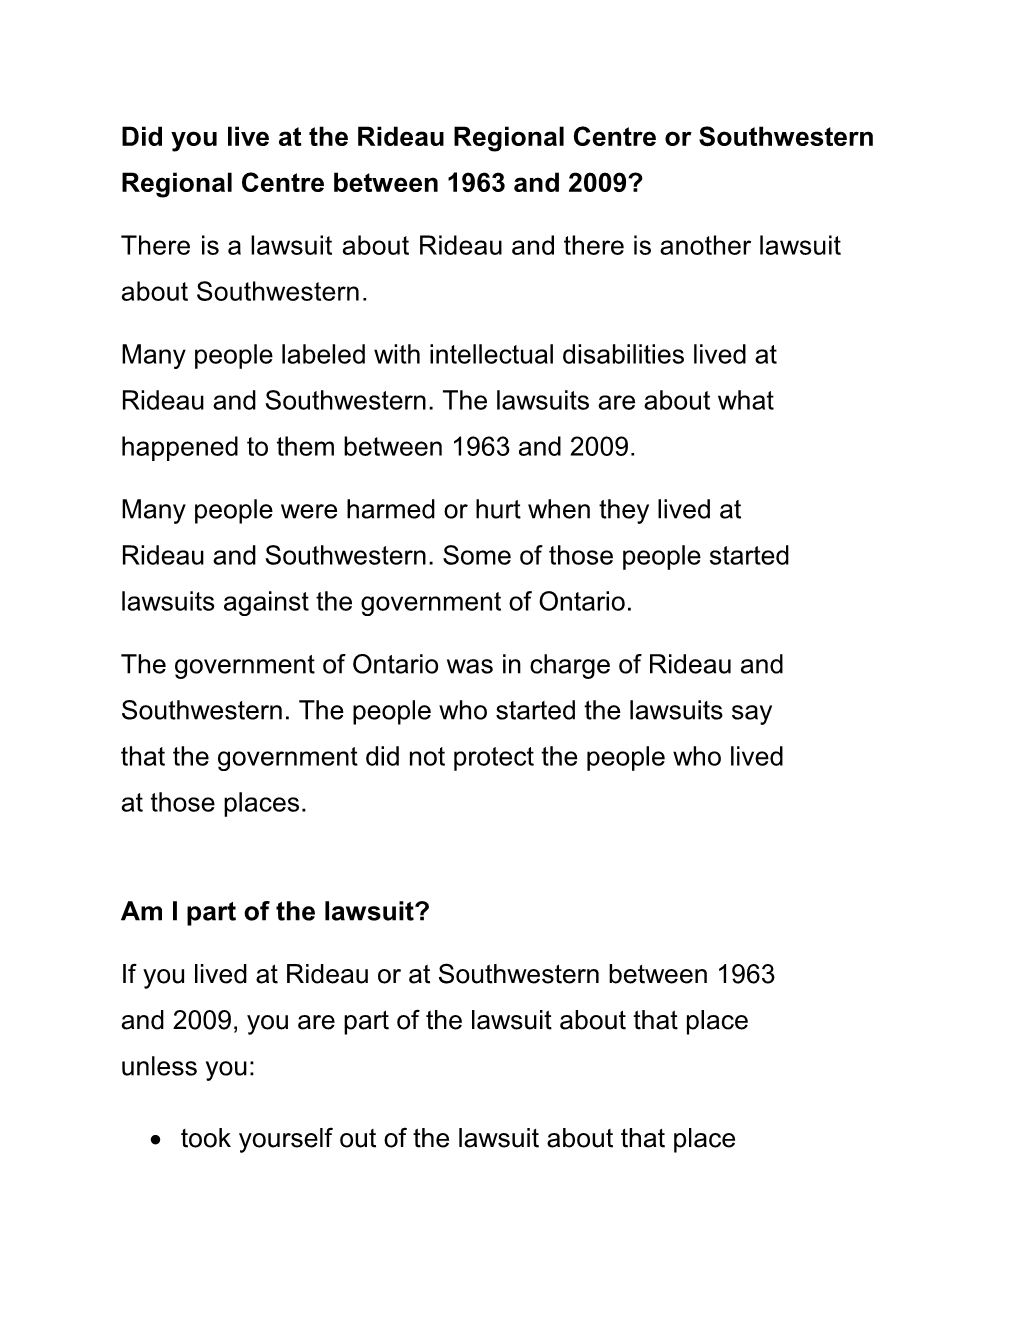 Did You Live at the Rideau Regional Centre Or Southwestern Regional Centre Between 1963 and 2009